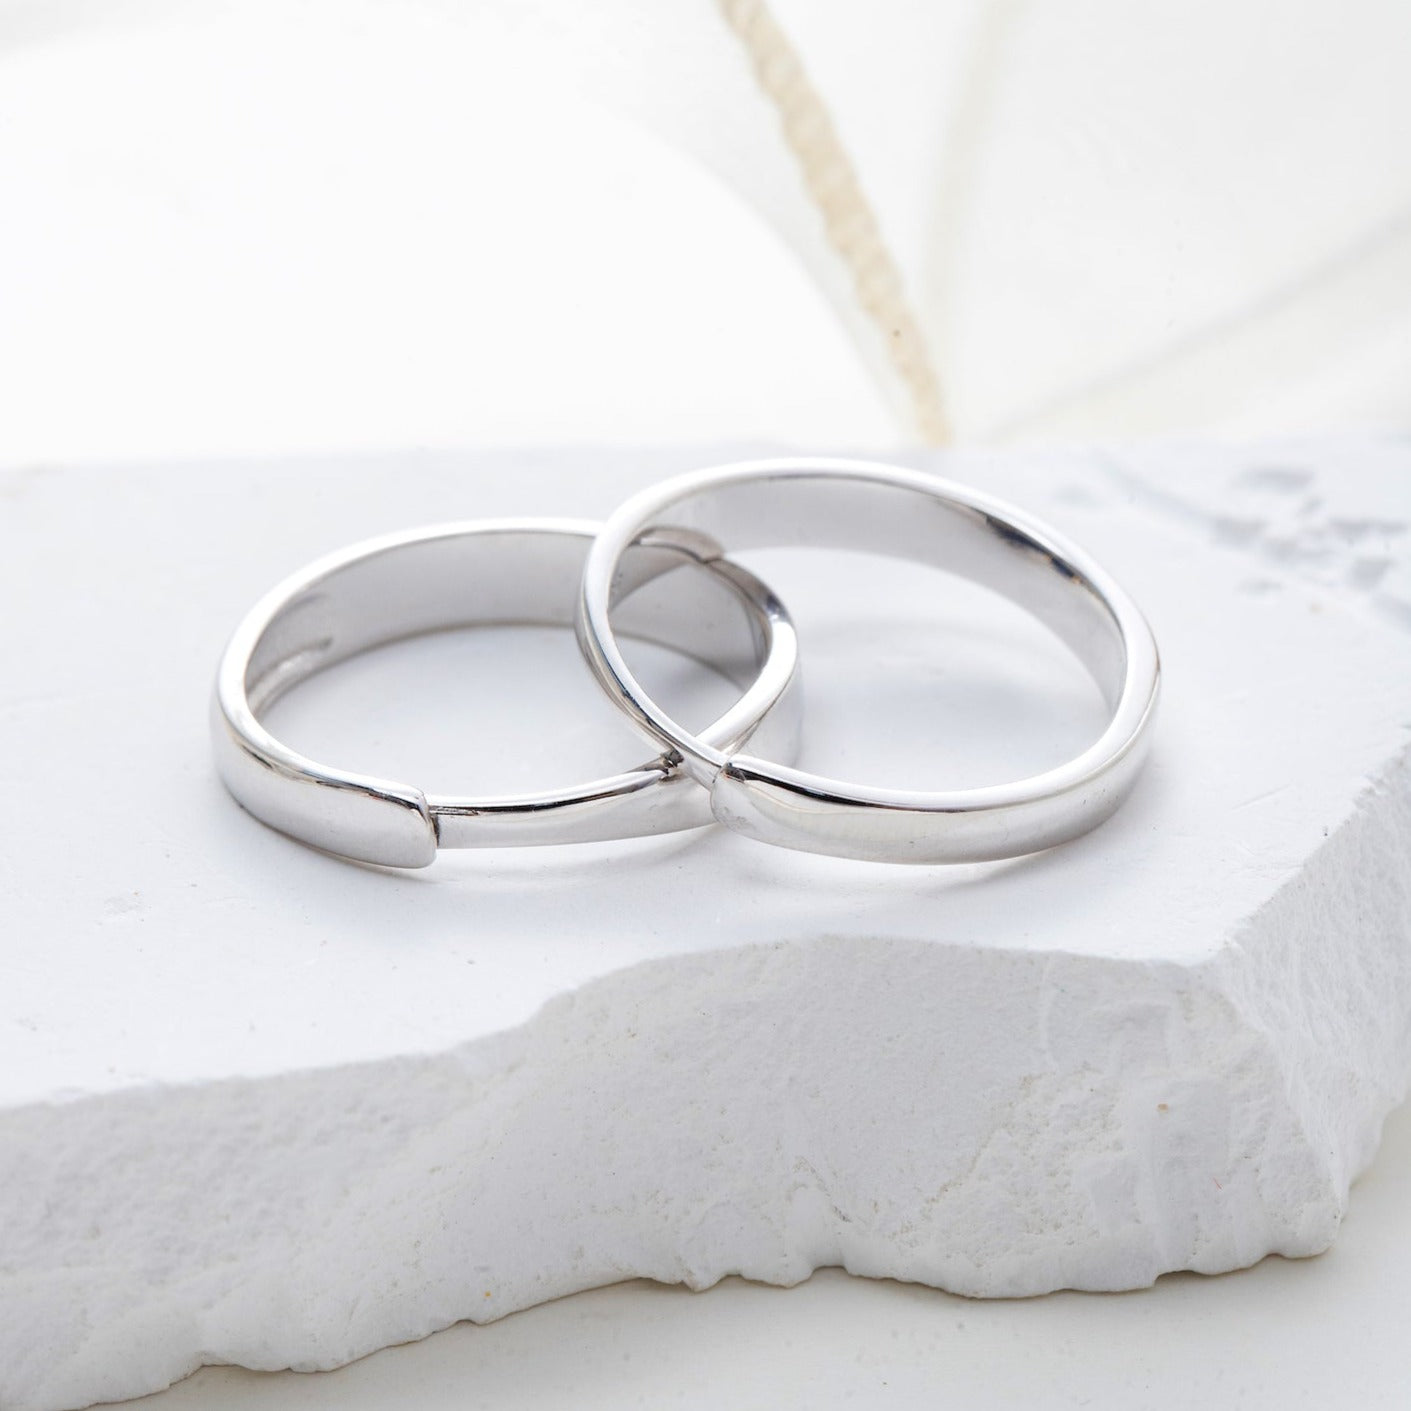 Buy the Silver Better Half Couple Rings - Silberry